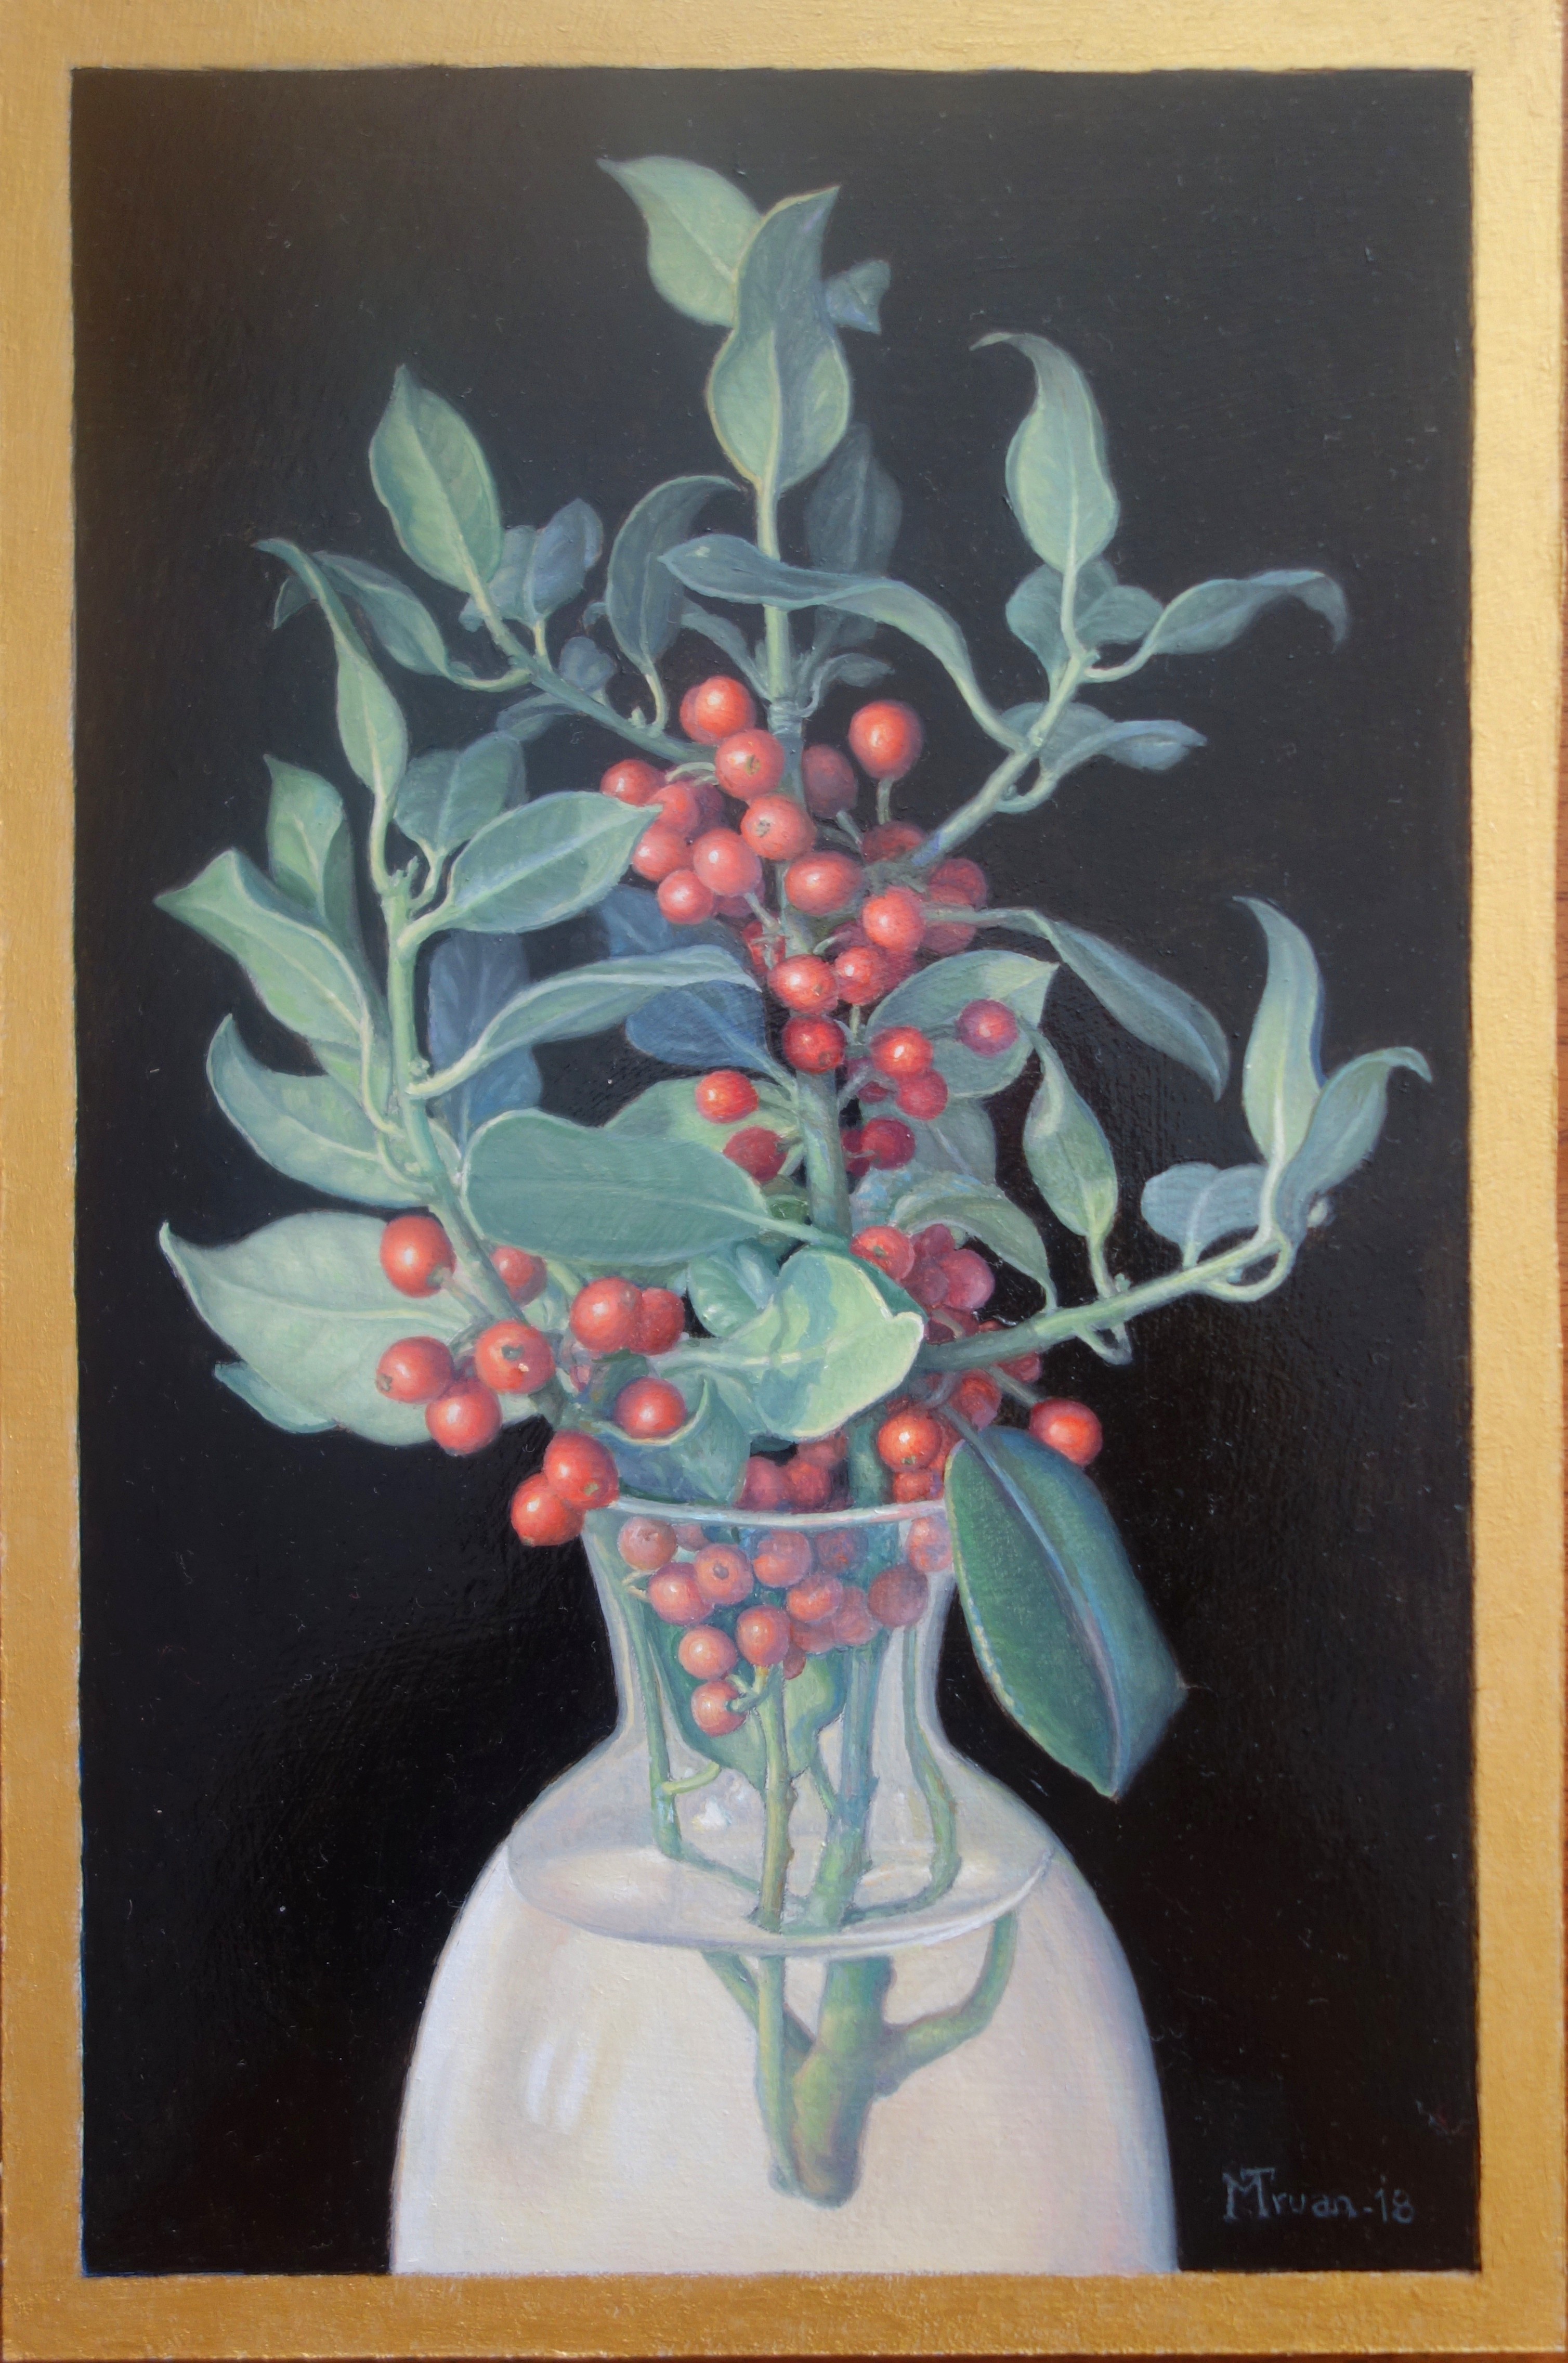 Branch of ardisias, 2018, oil on wood, 11.8x7.8in.